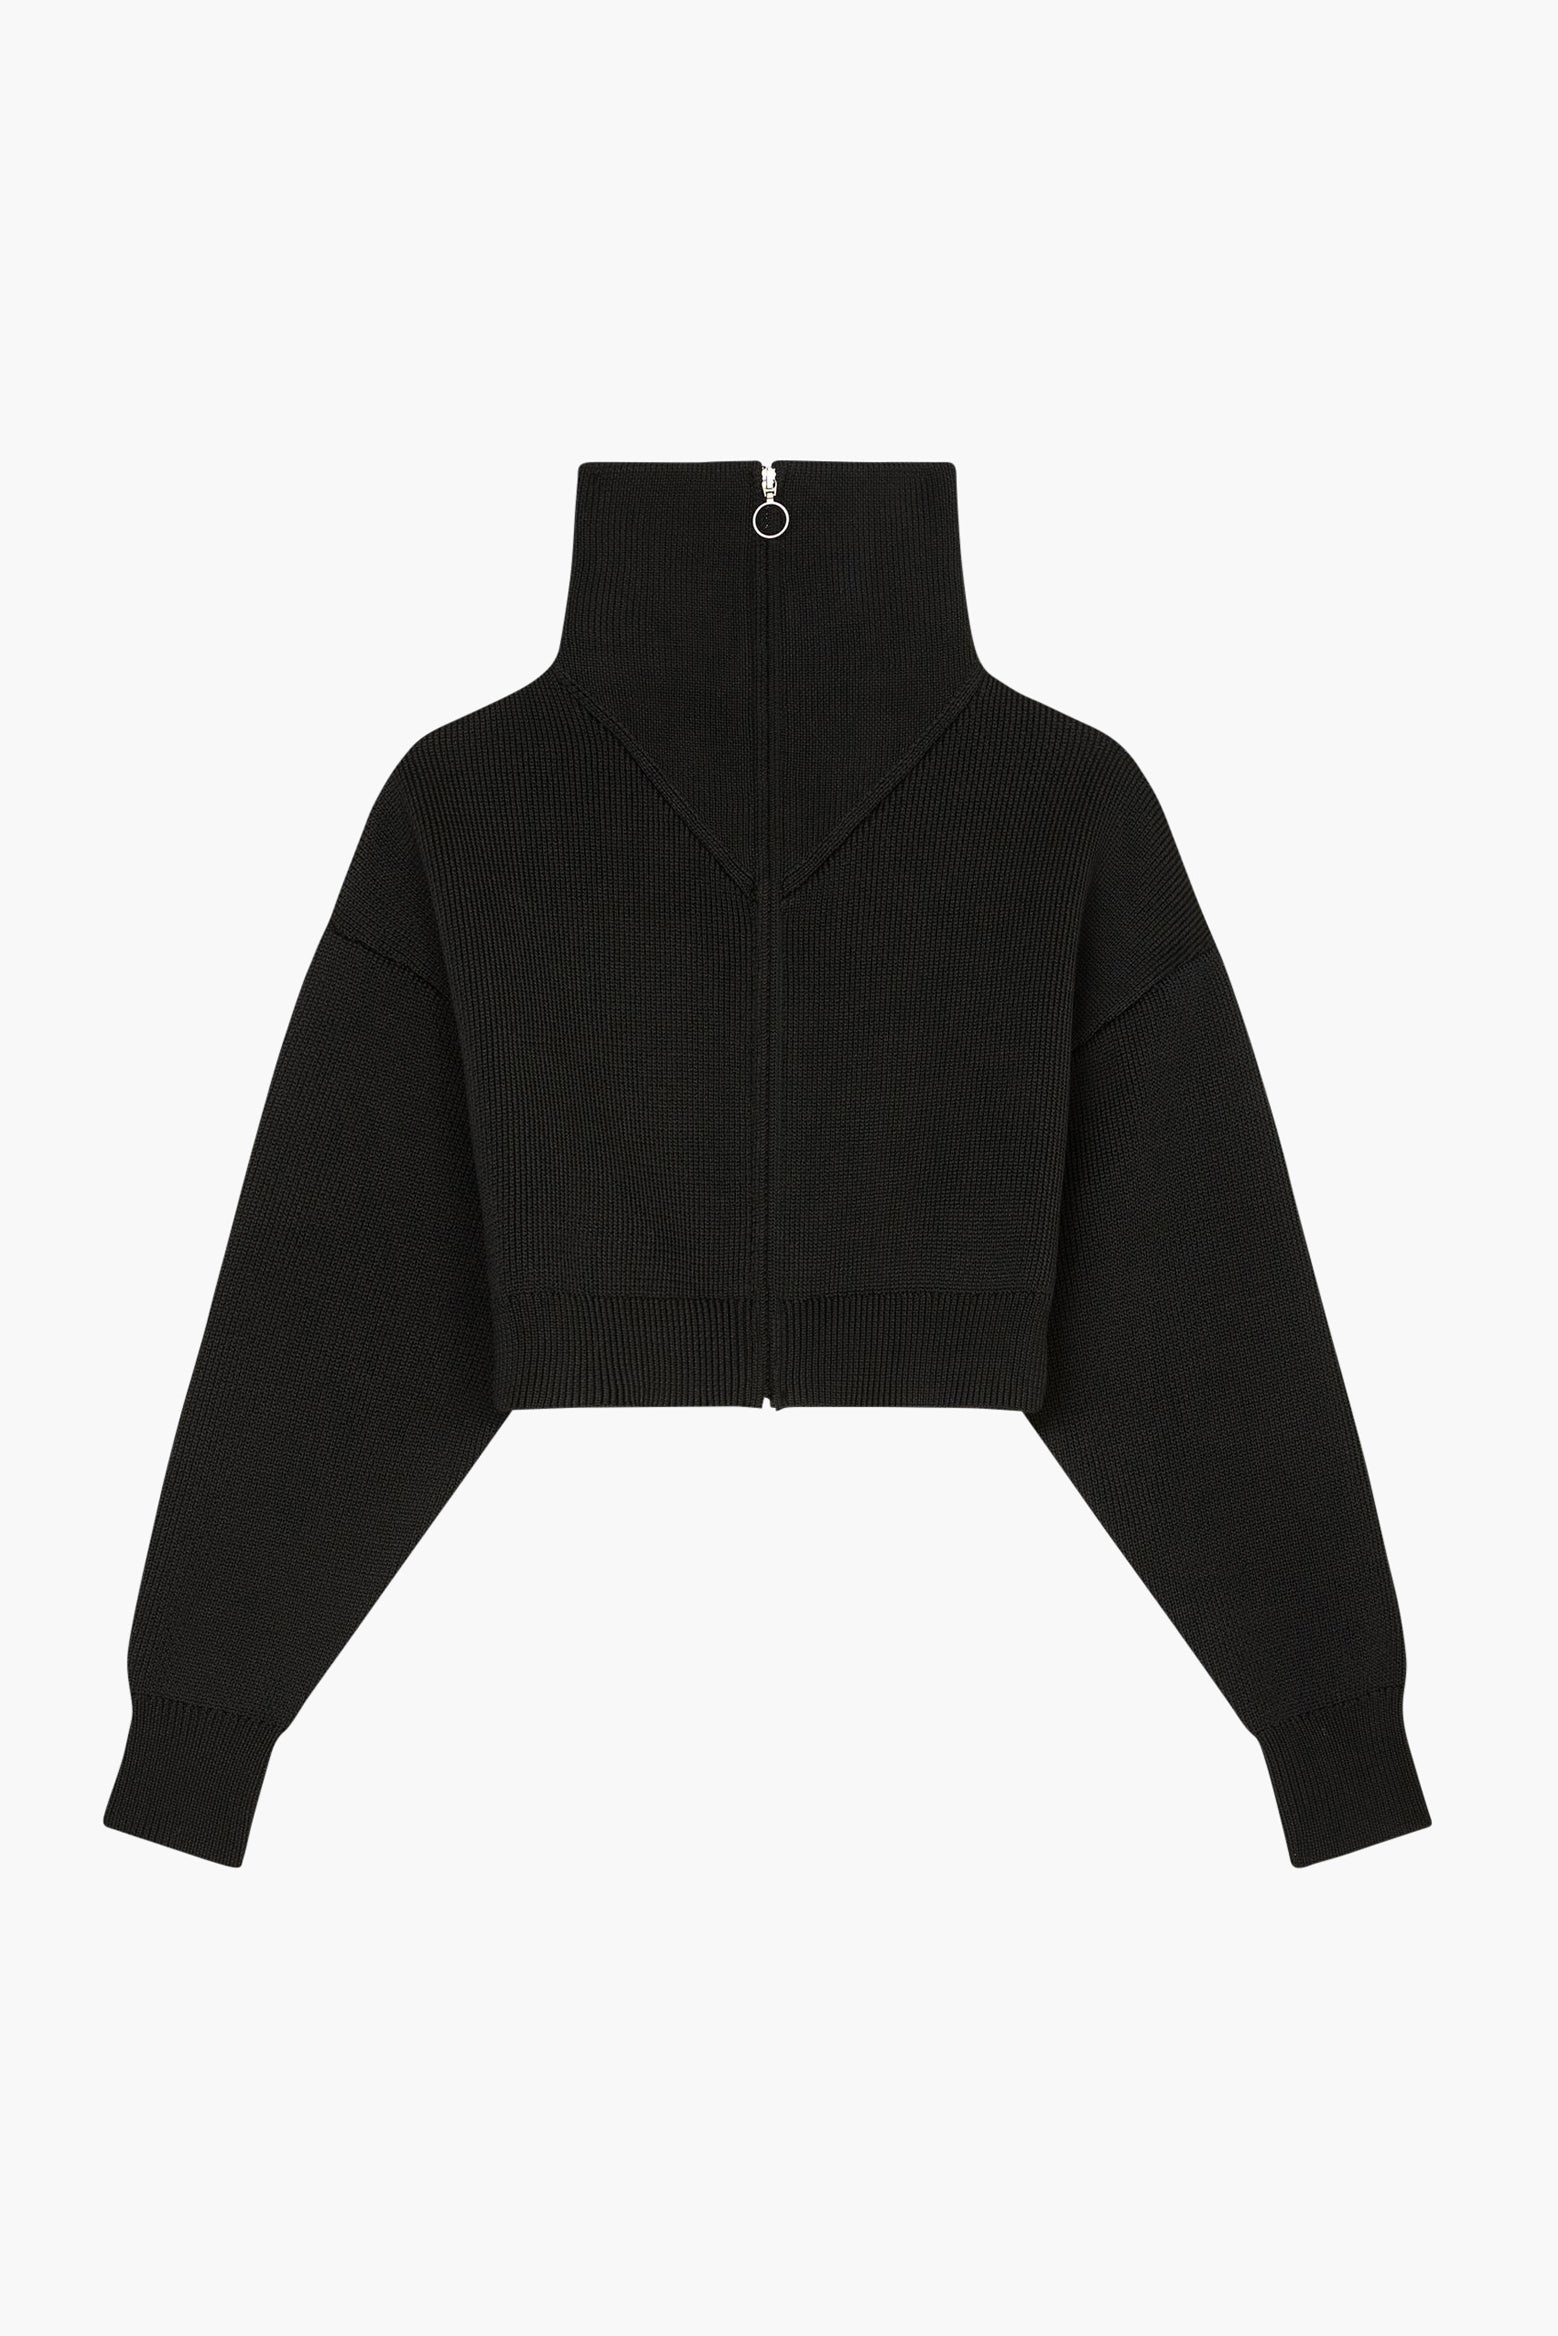 The Isabel Marant Oxan Cardigan in Black available at The New Trend Australia